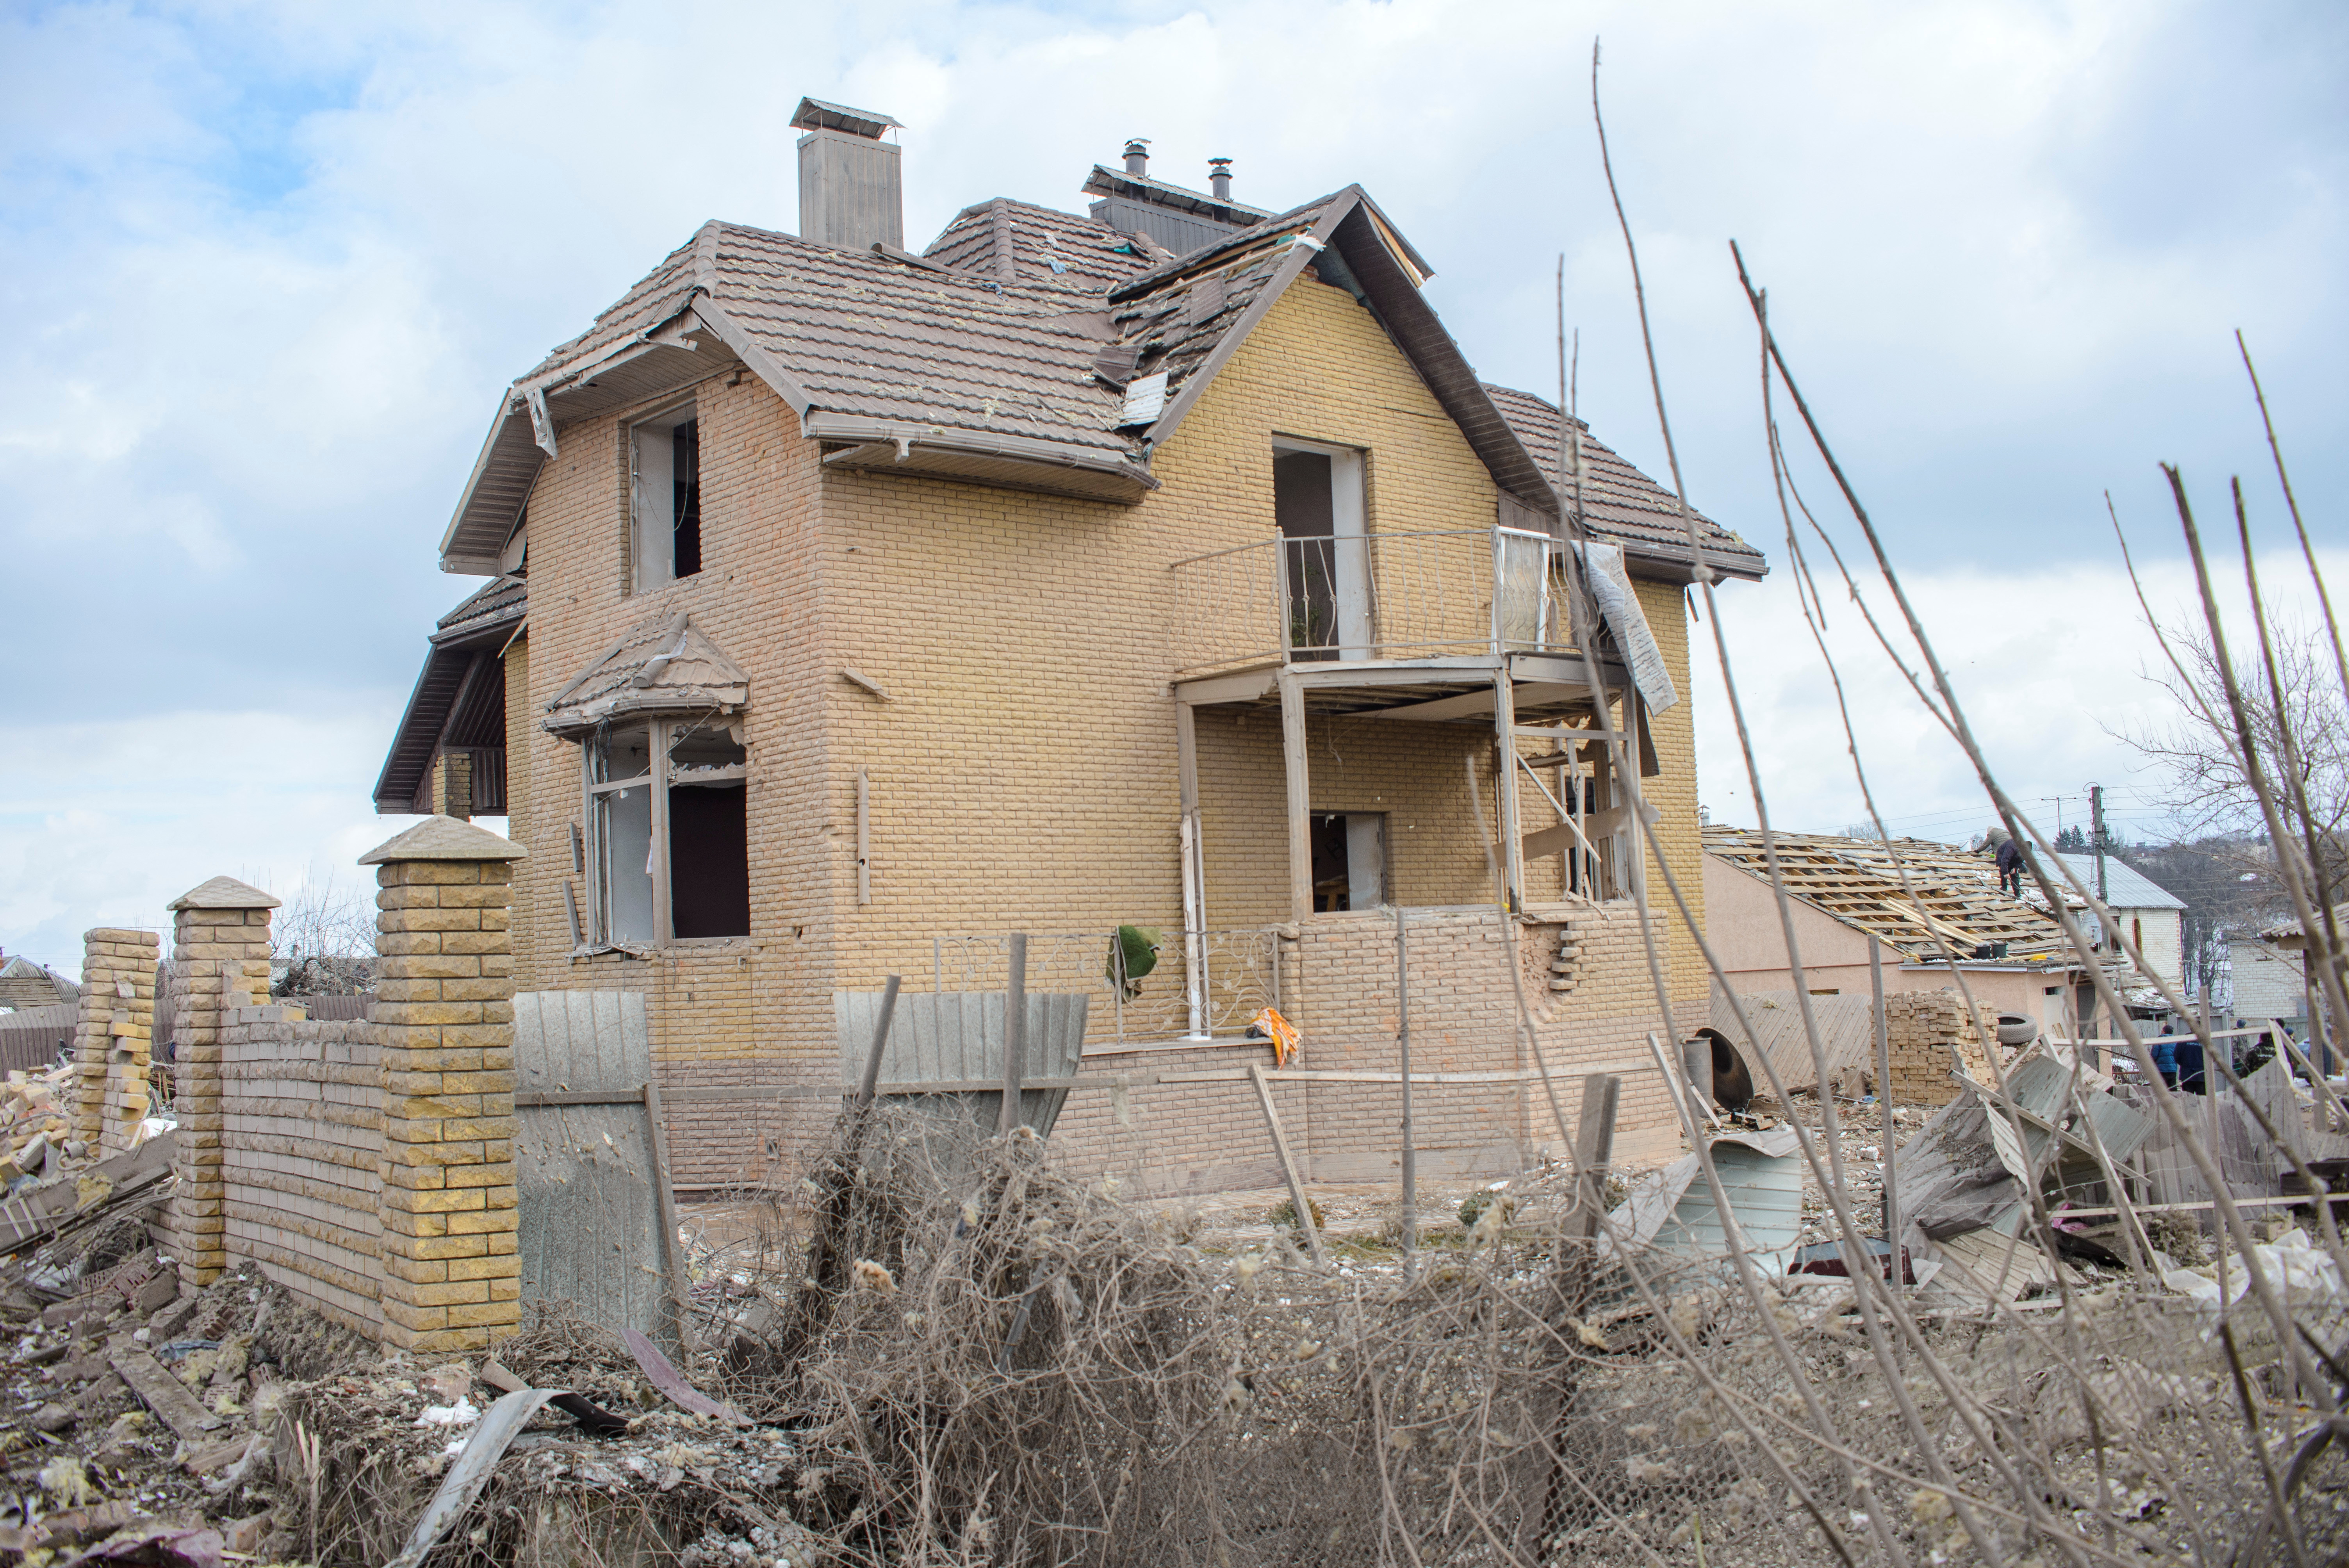 Aftermath of shelling in Sumy